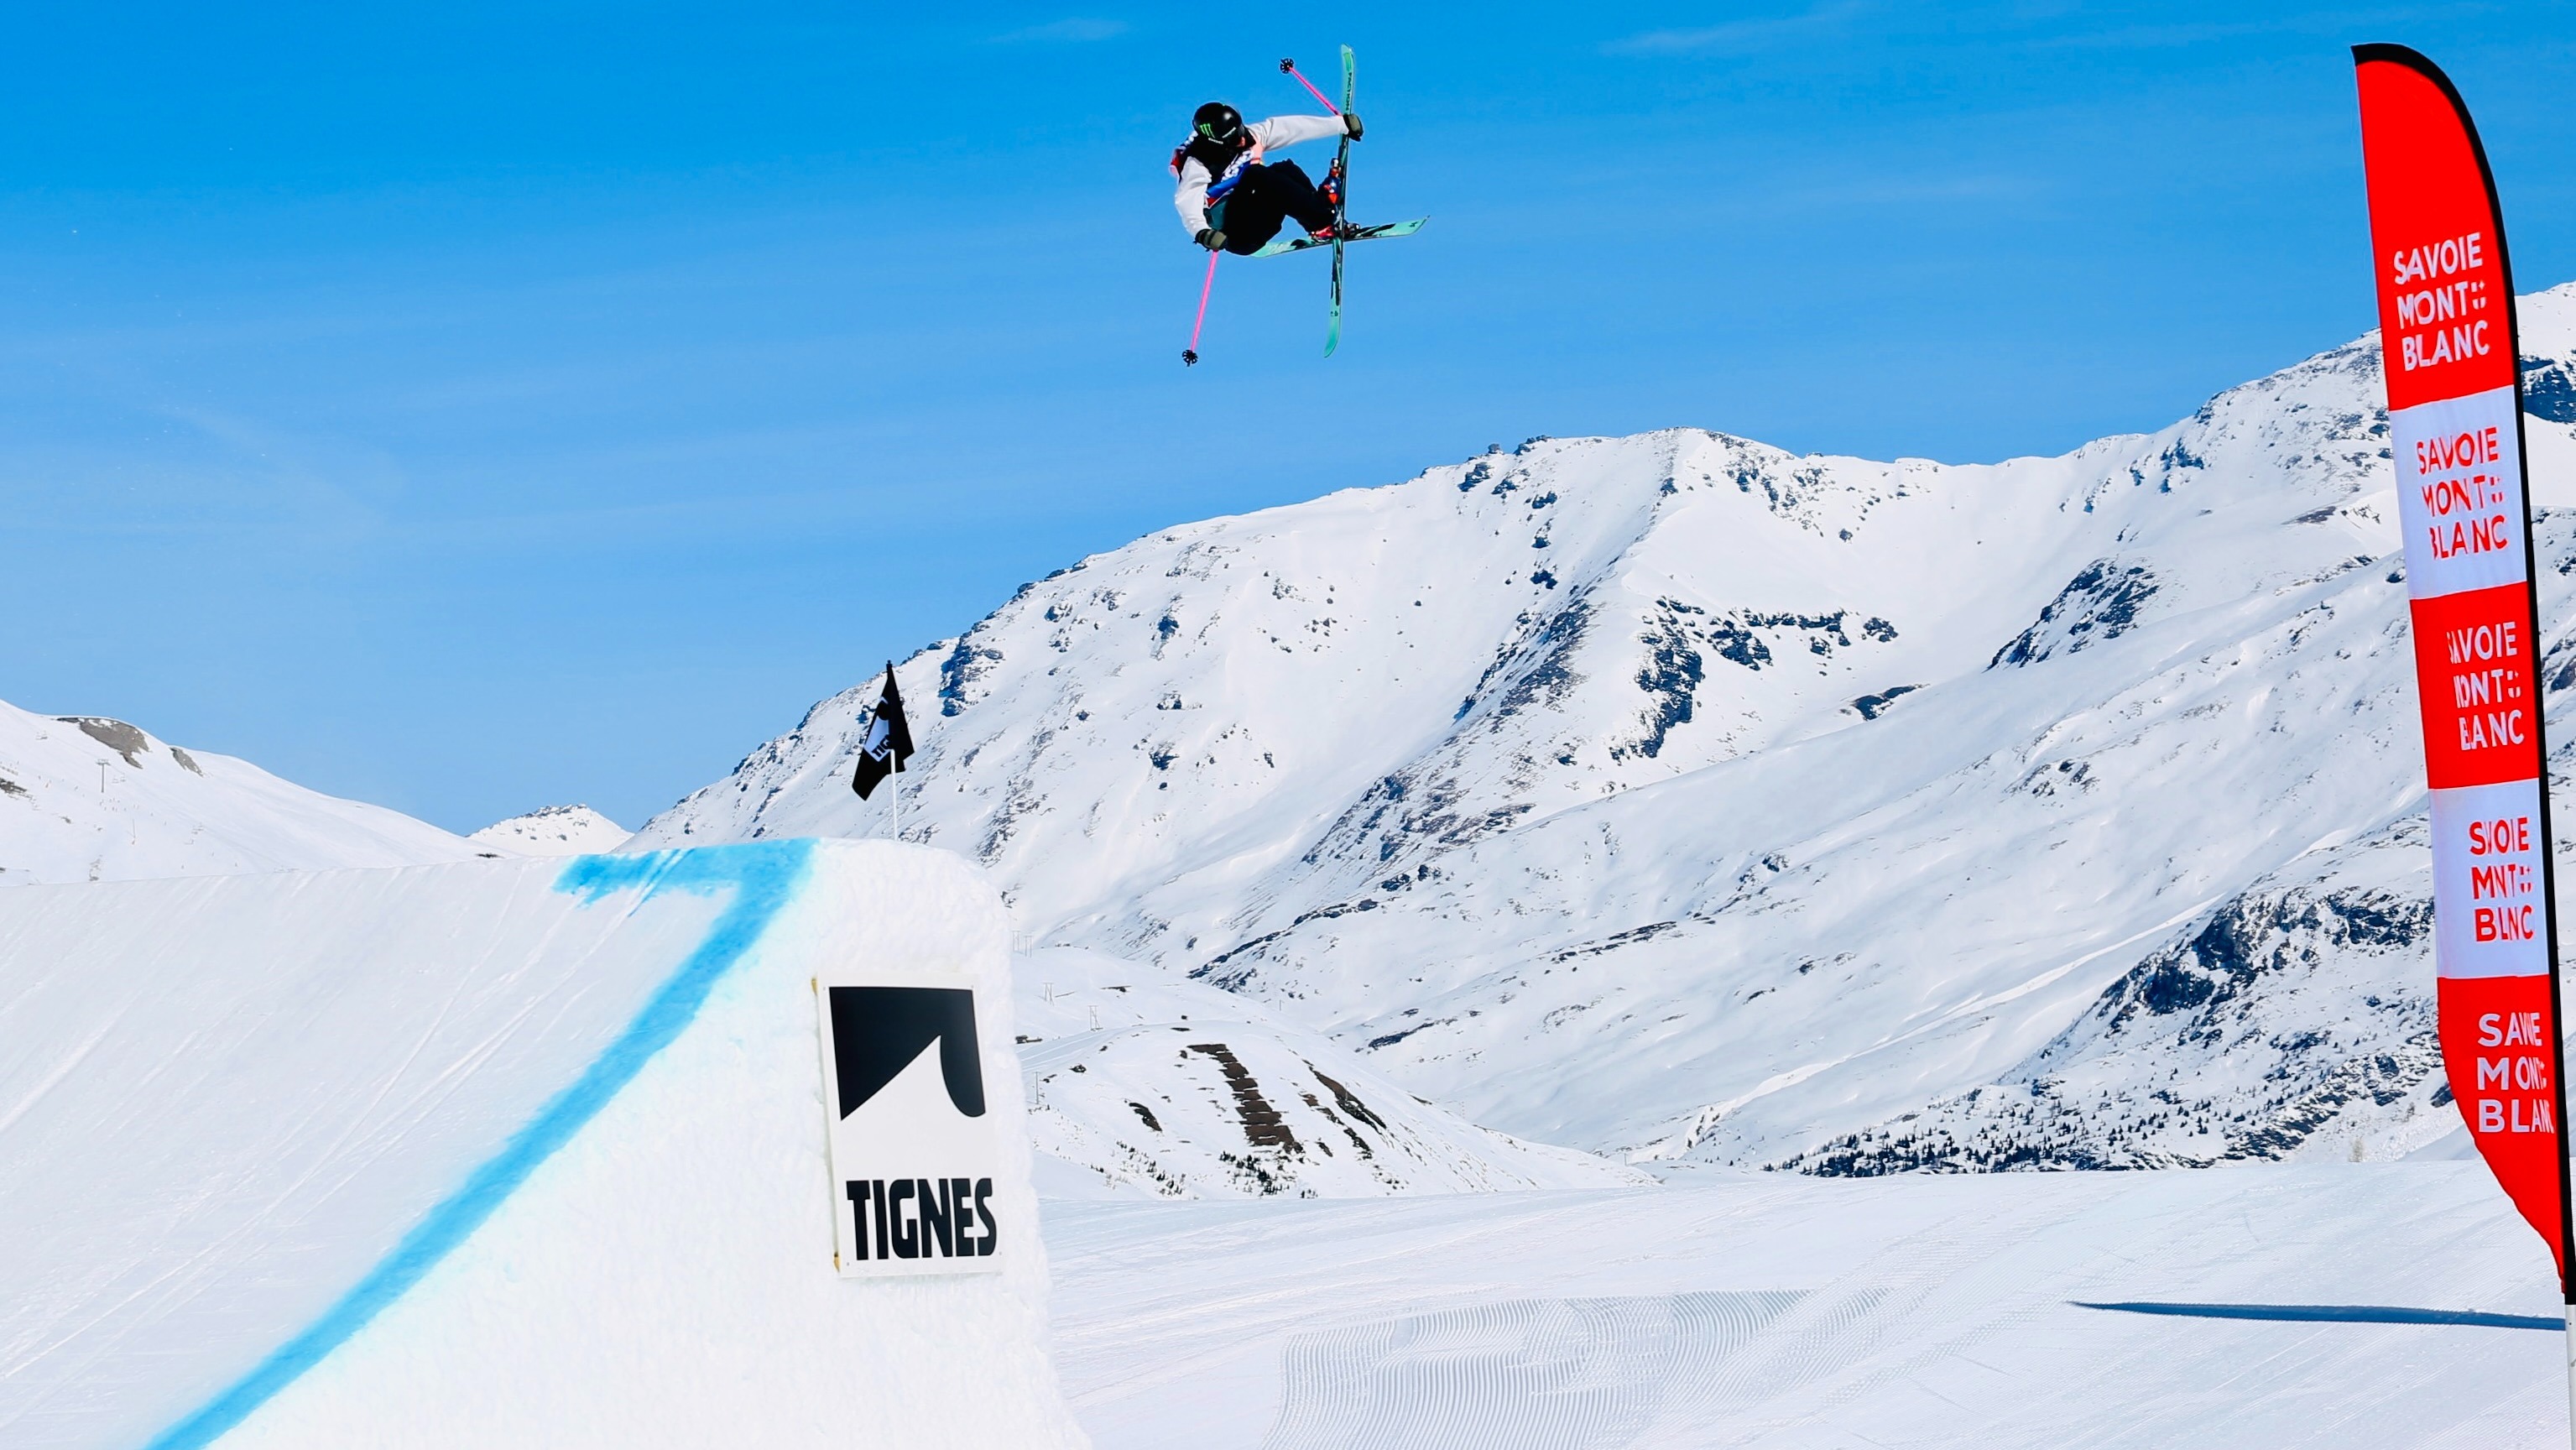 FIS Slopestyle World Cup Tignes Results and Recap